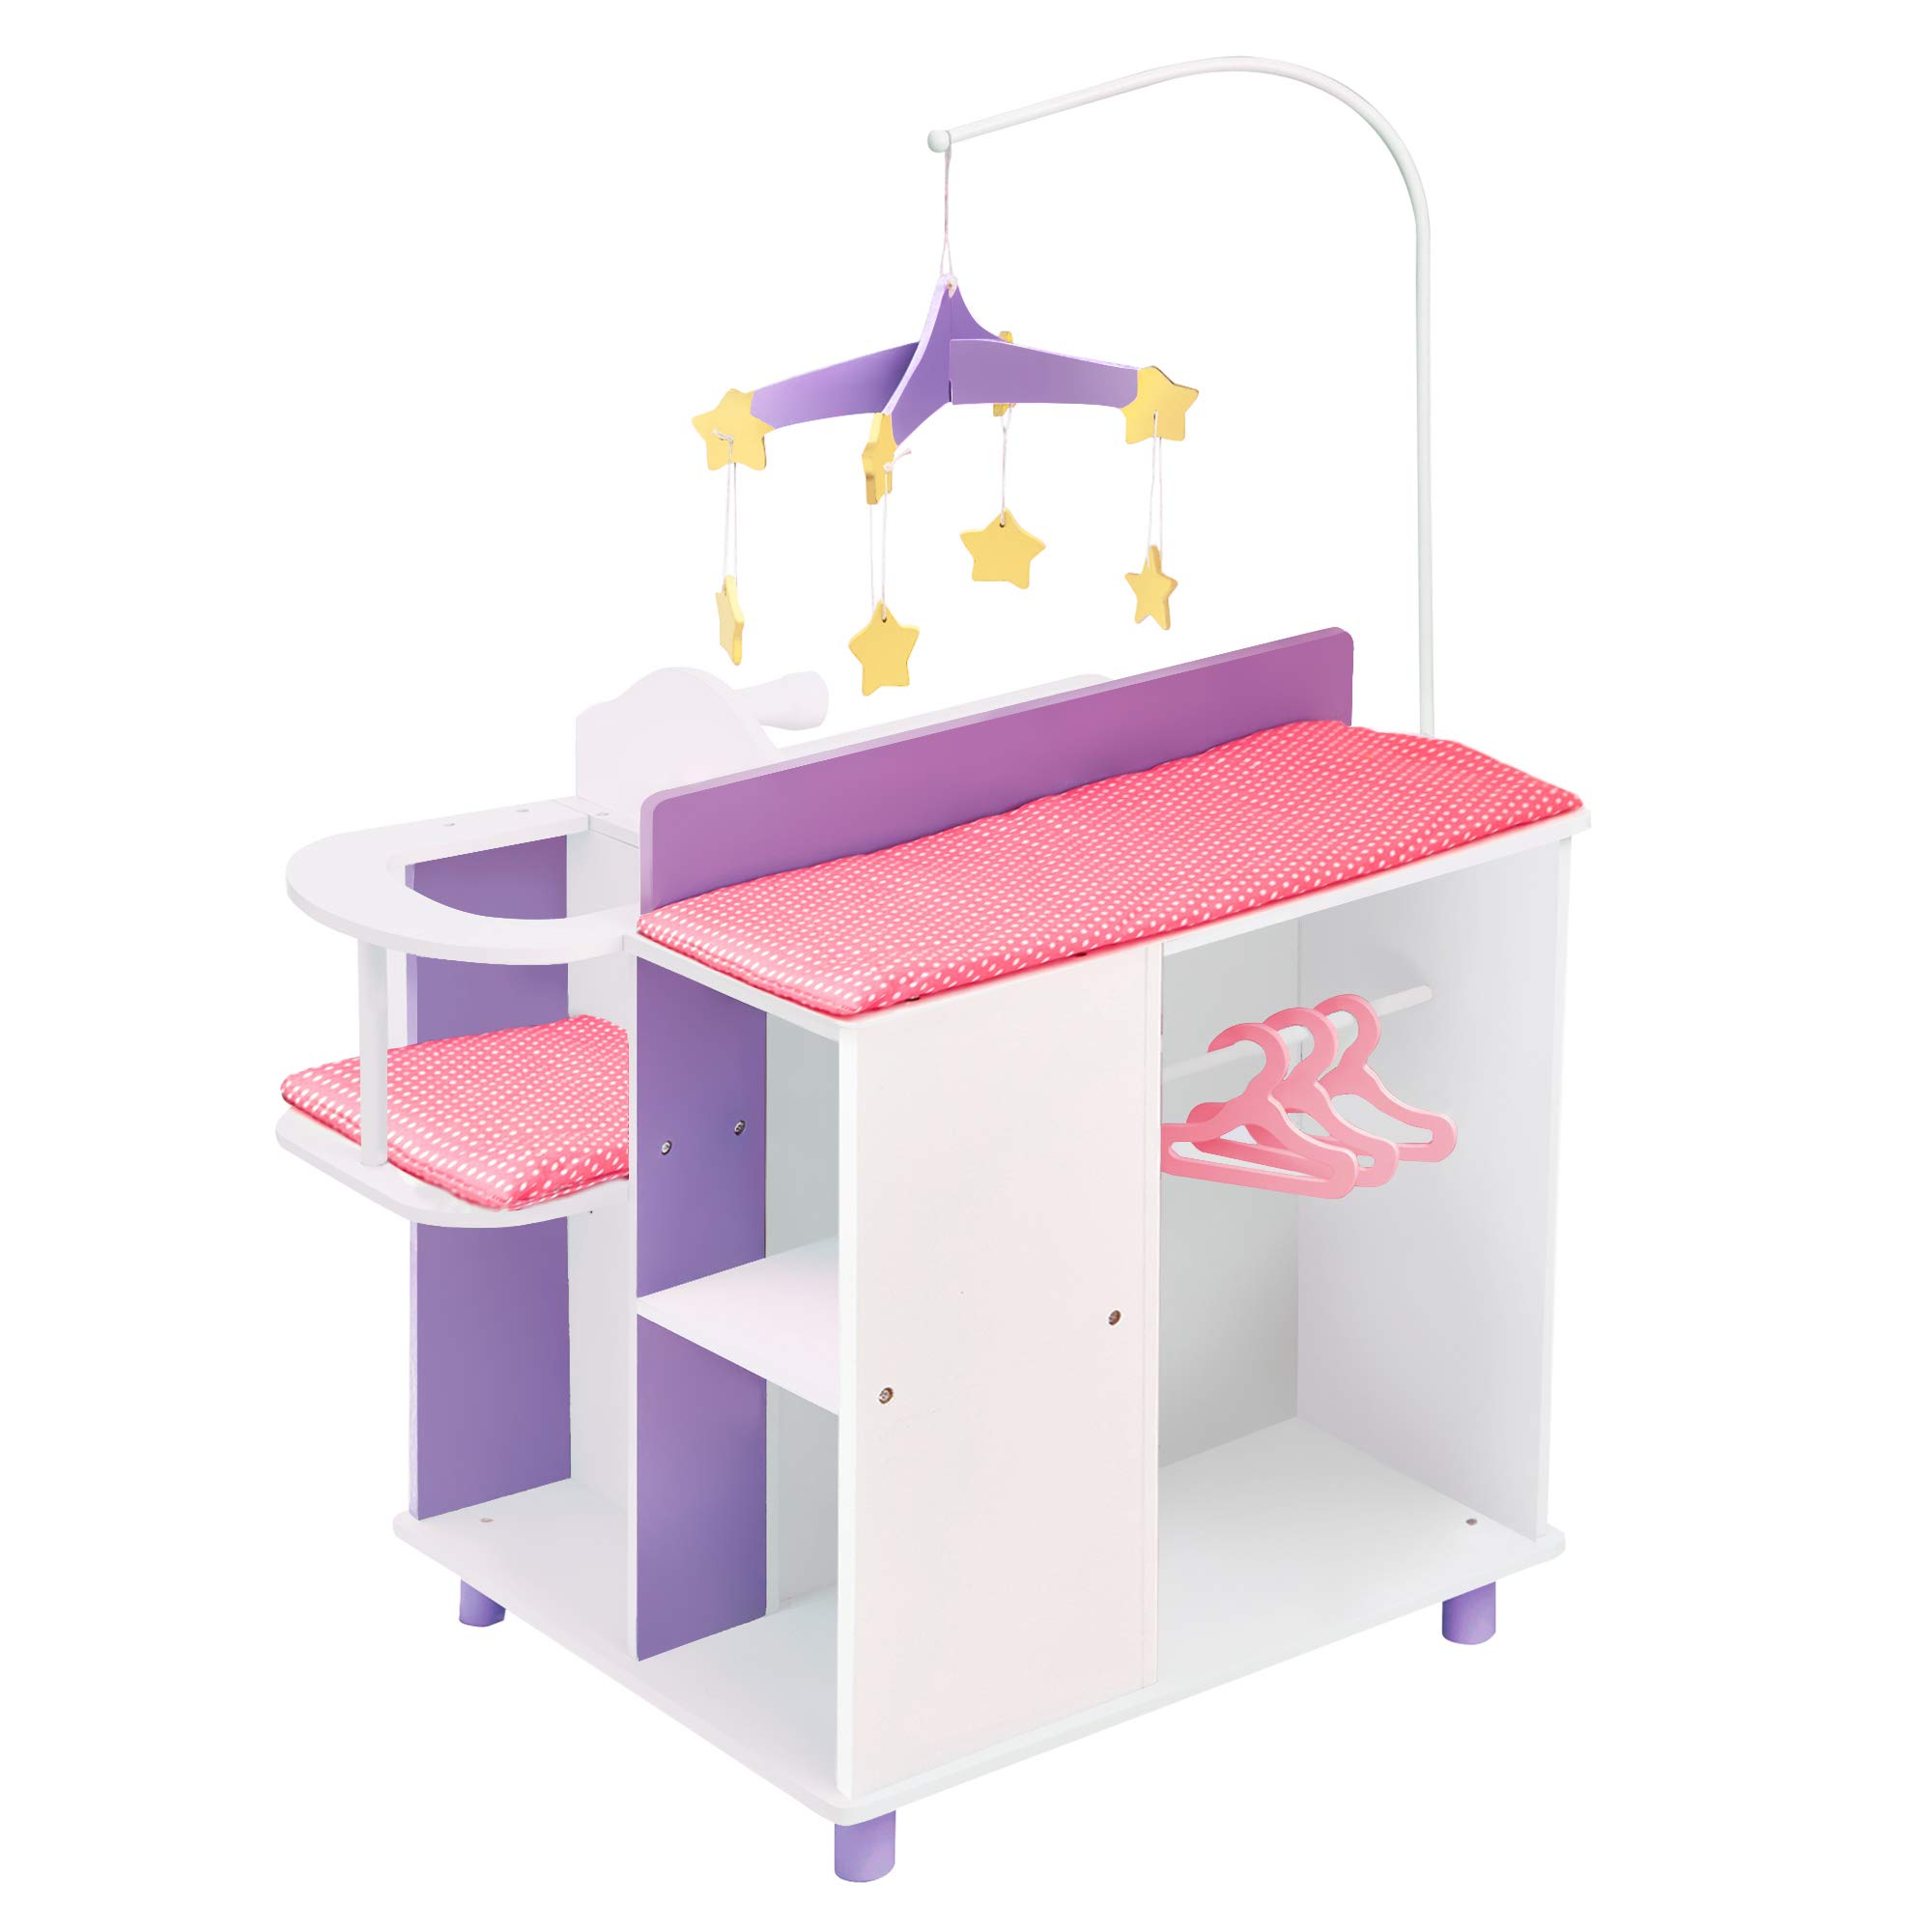 Olivia's Little World Baby Doll Changing Station, Baby Care Activity Center, Role Play Nursery Center with Storage for Dolls High Chair, Accessories for up to 18 Inch Dolls, Pink/Purple/White